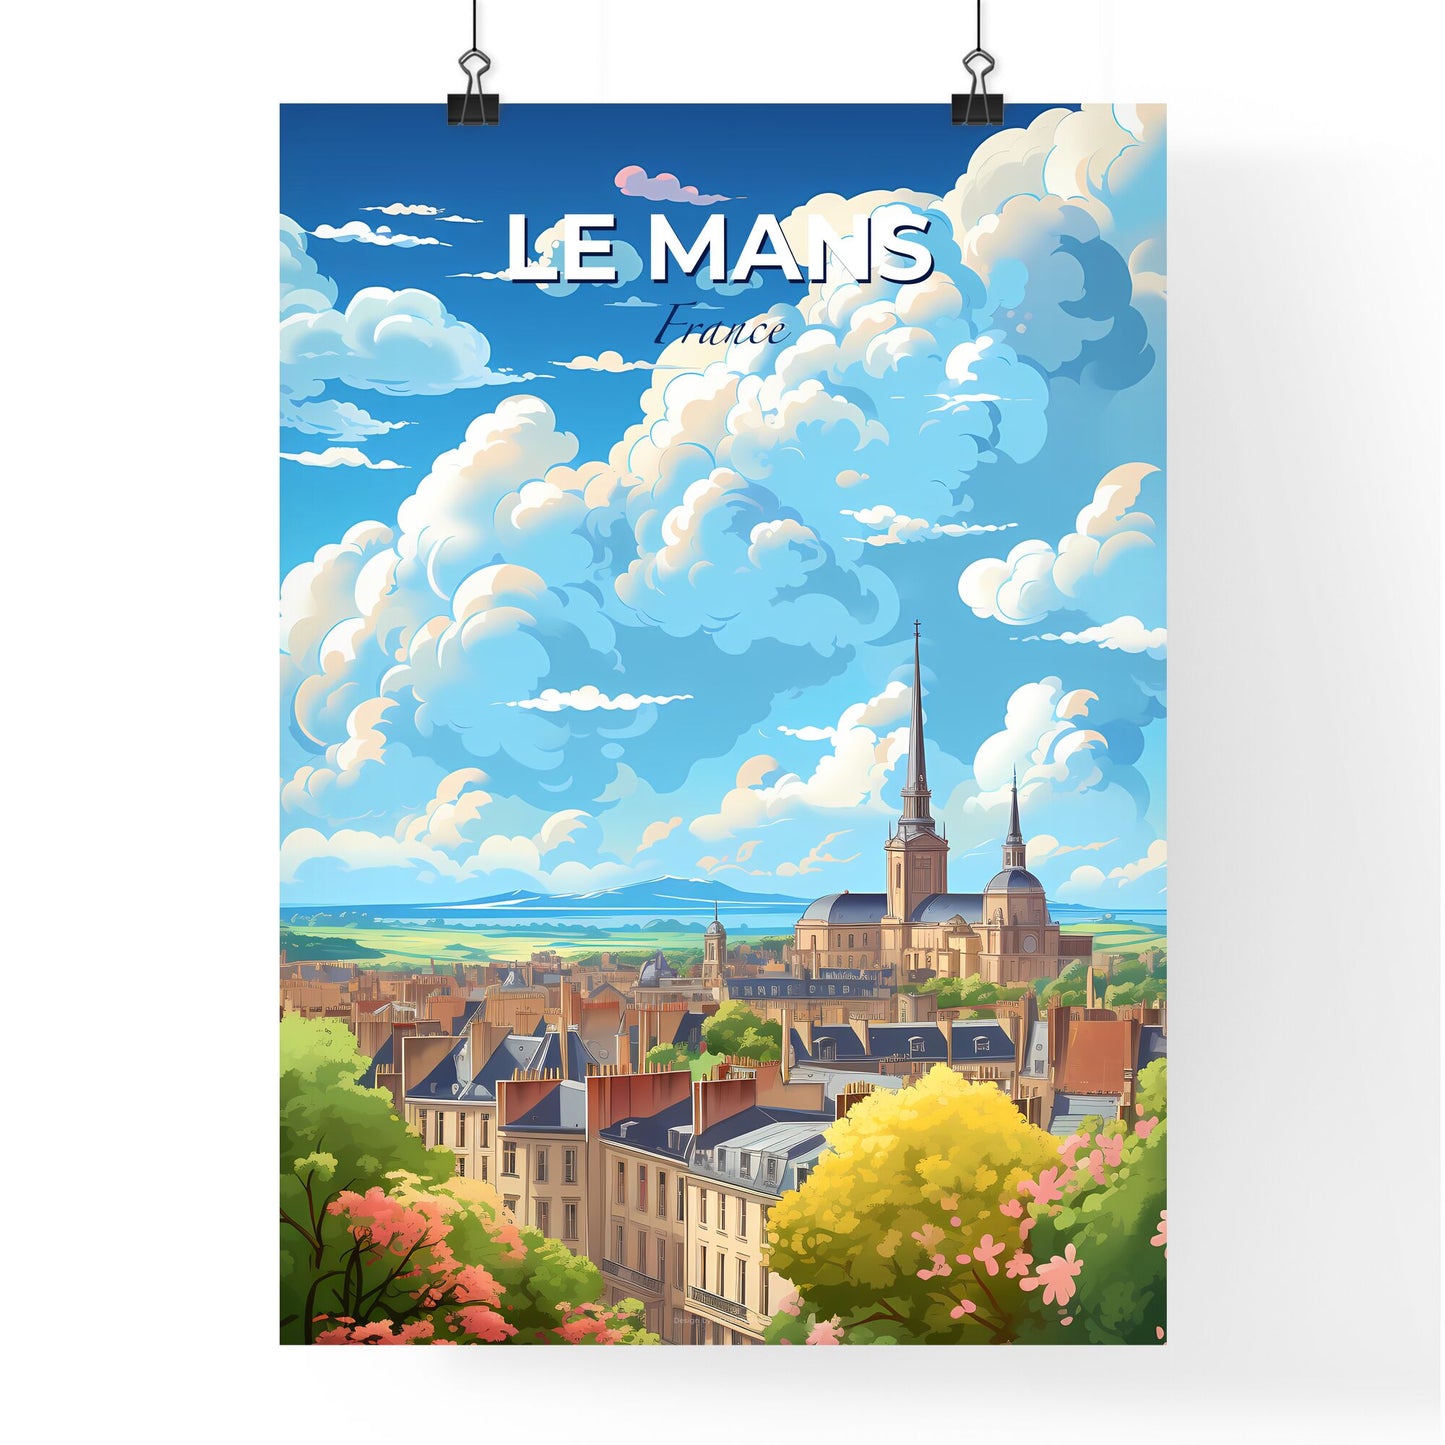 Le Mans France Skyline - A City Landscape With A Large Building And Trees - Customizable Travel Gift Default Title